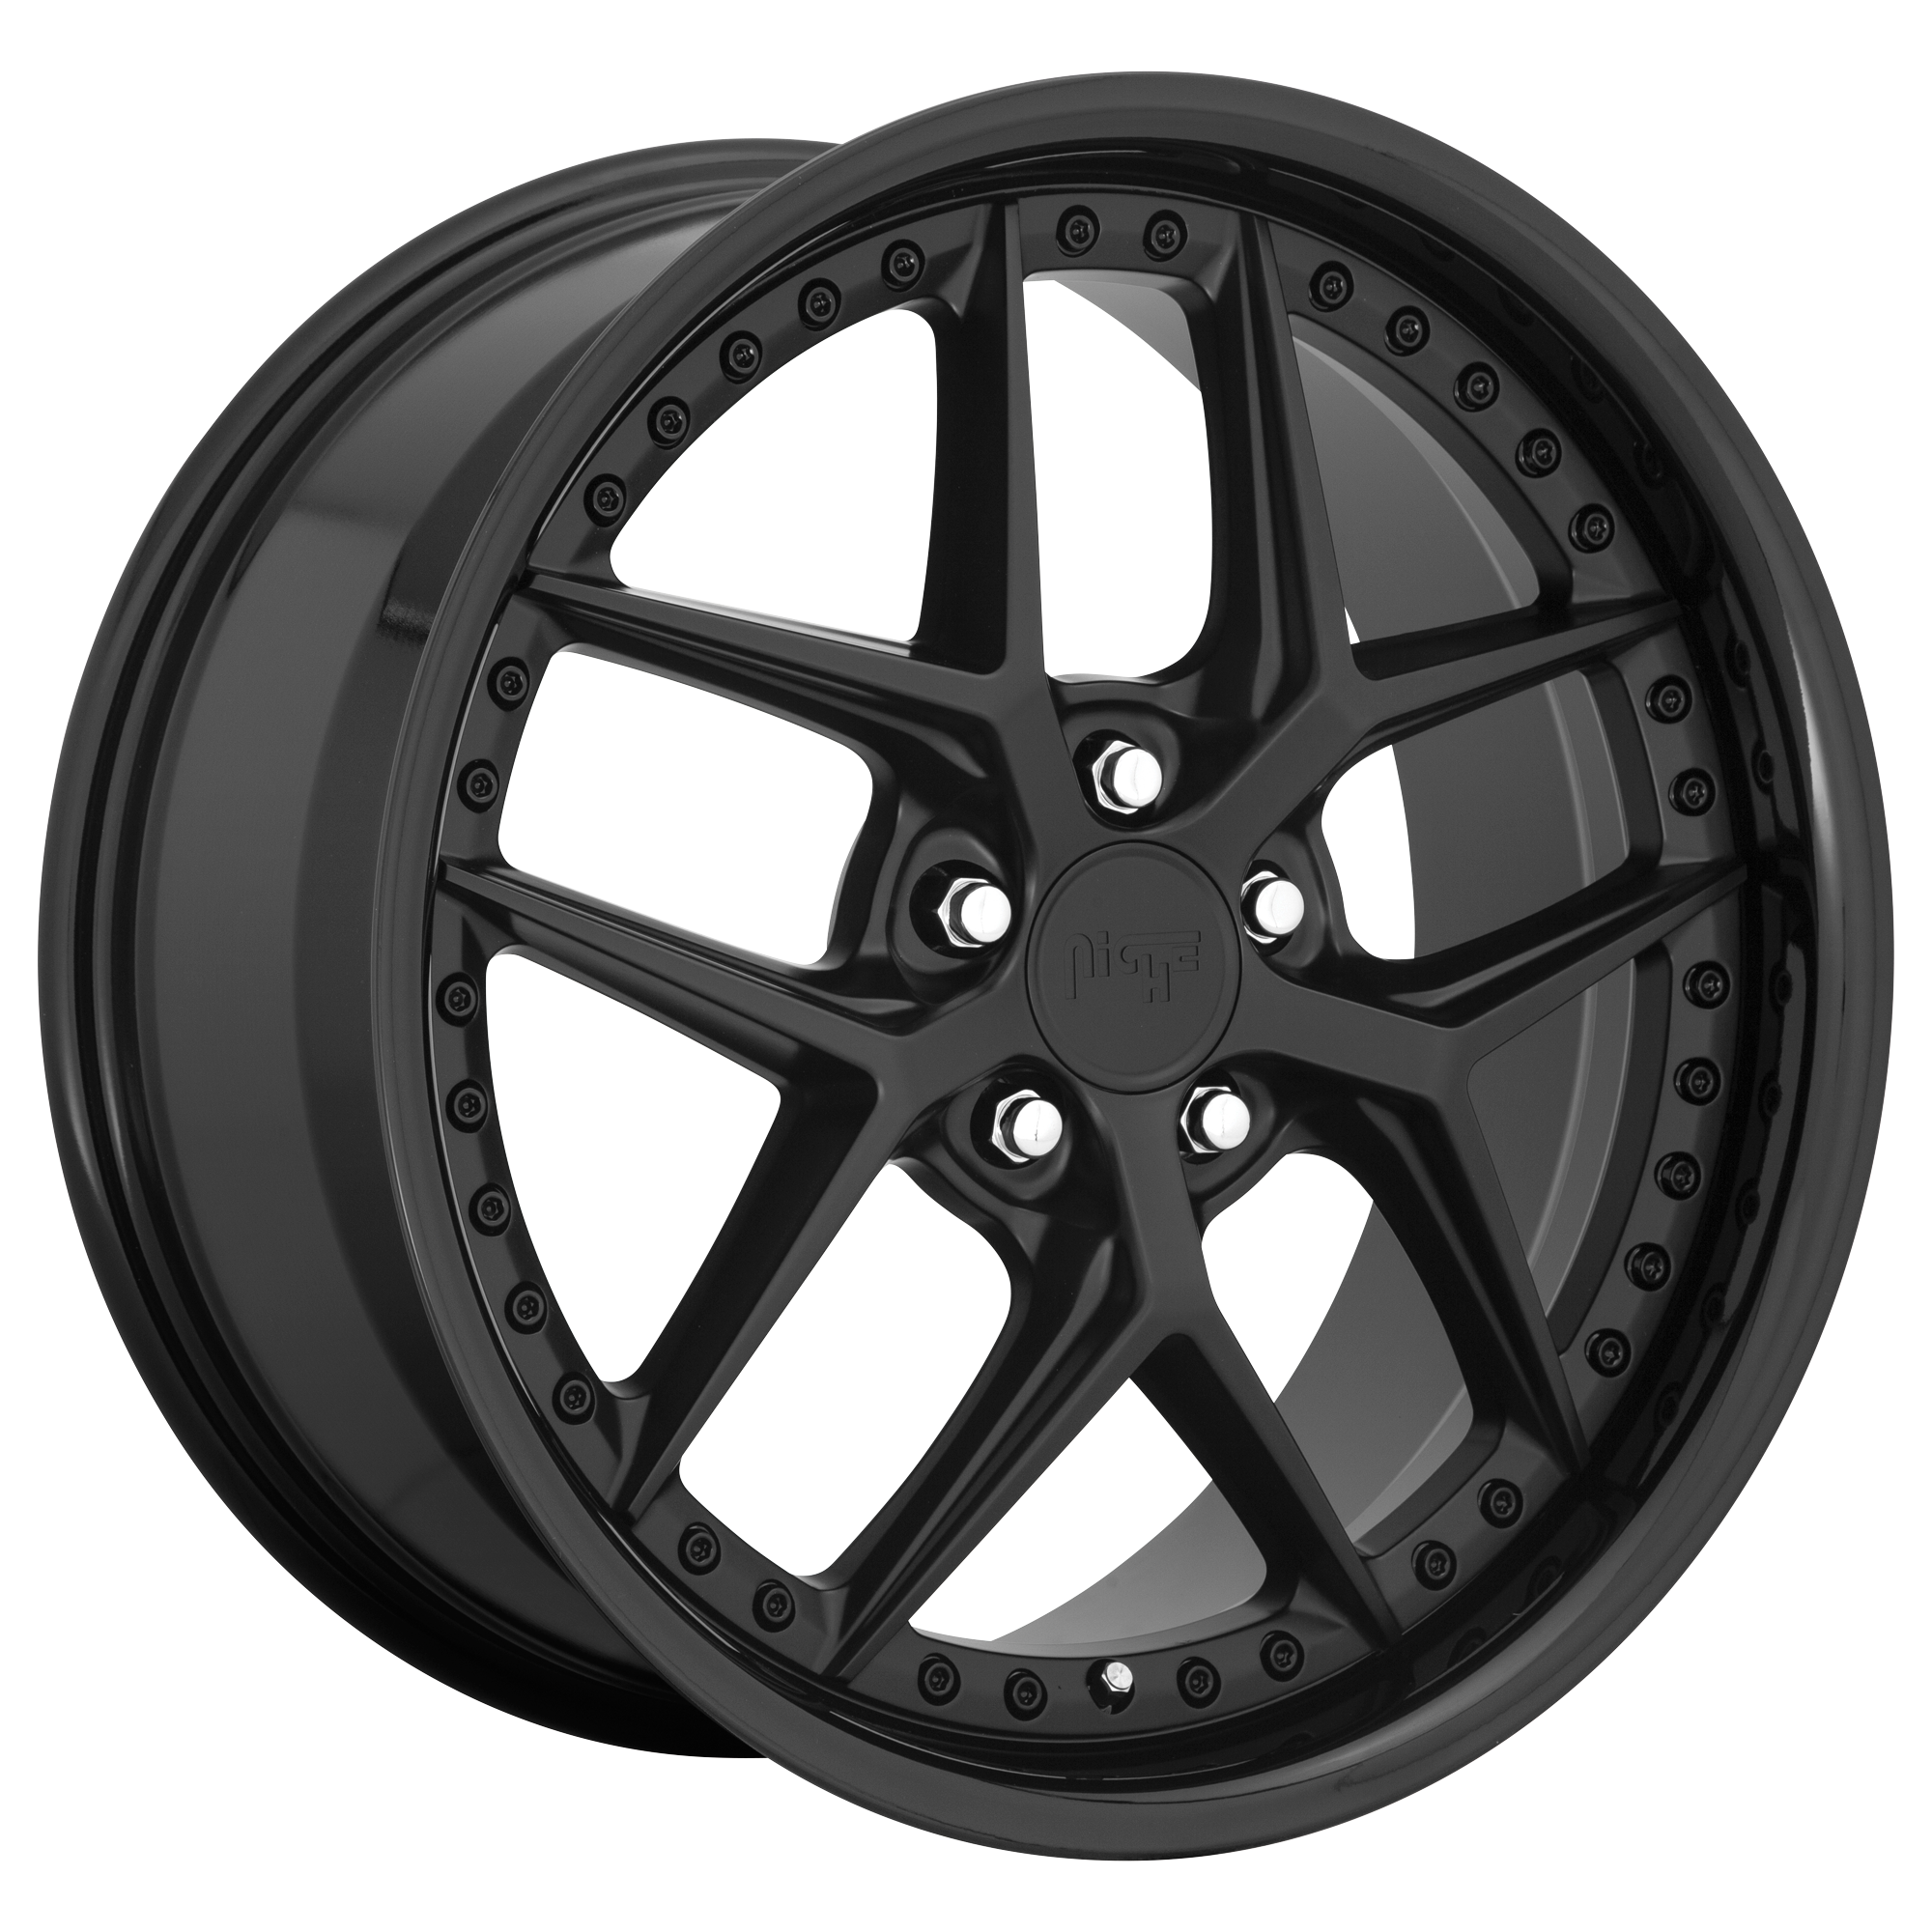 VICE 19x8.5 5x112.00 GLOSS BLACK MATTE BLACK (42 mm) - Tires and Engine Performance